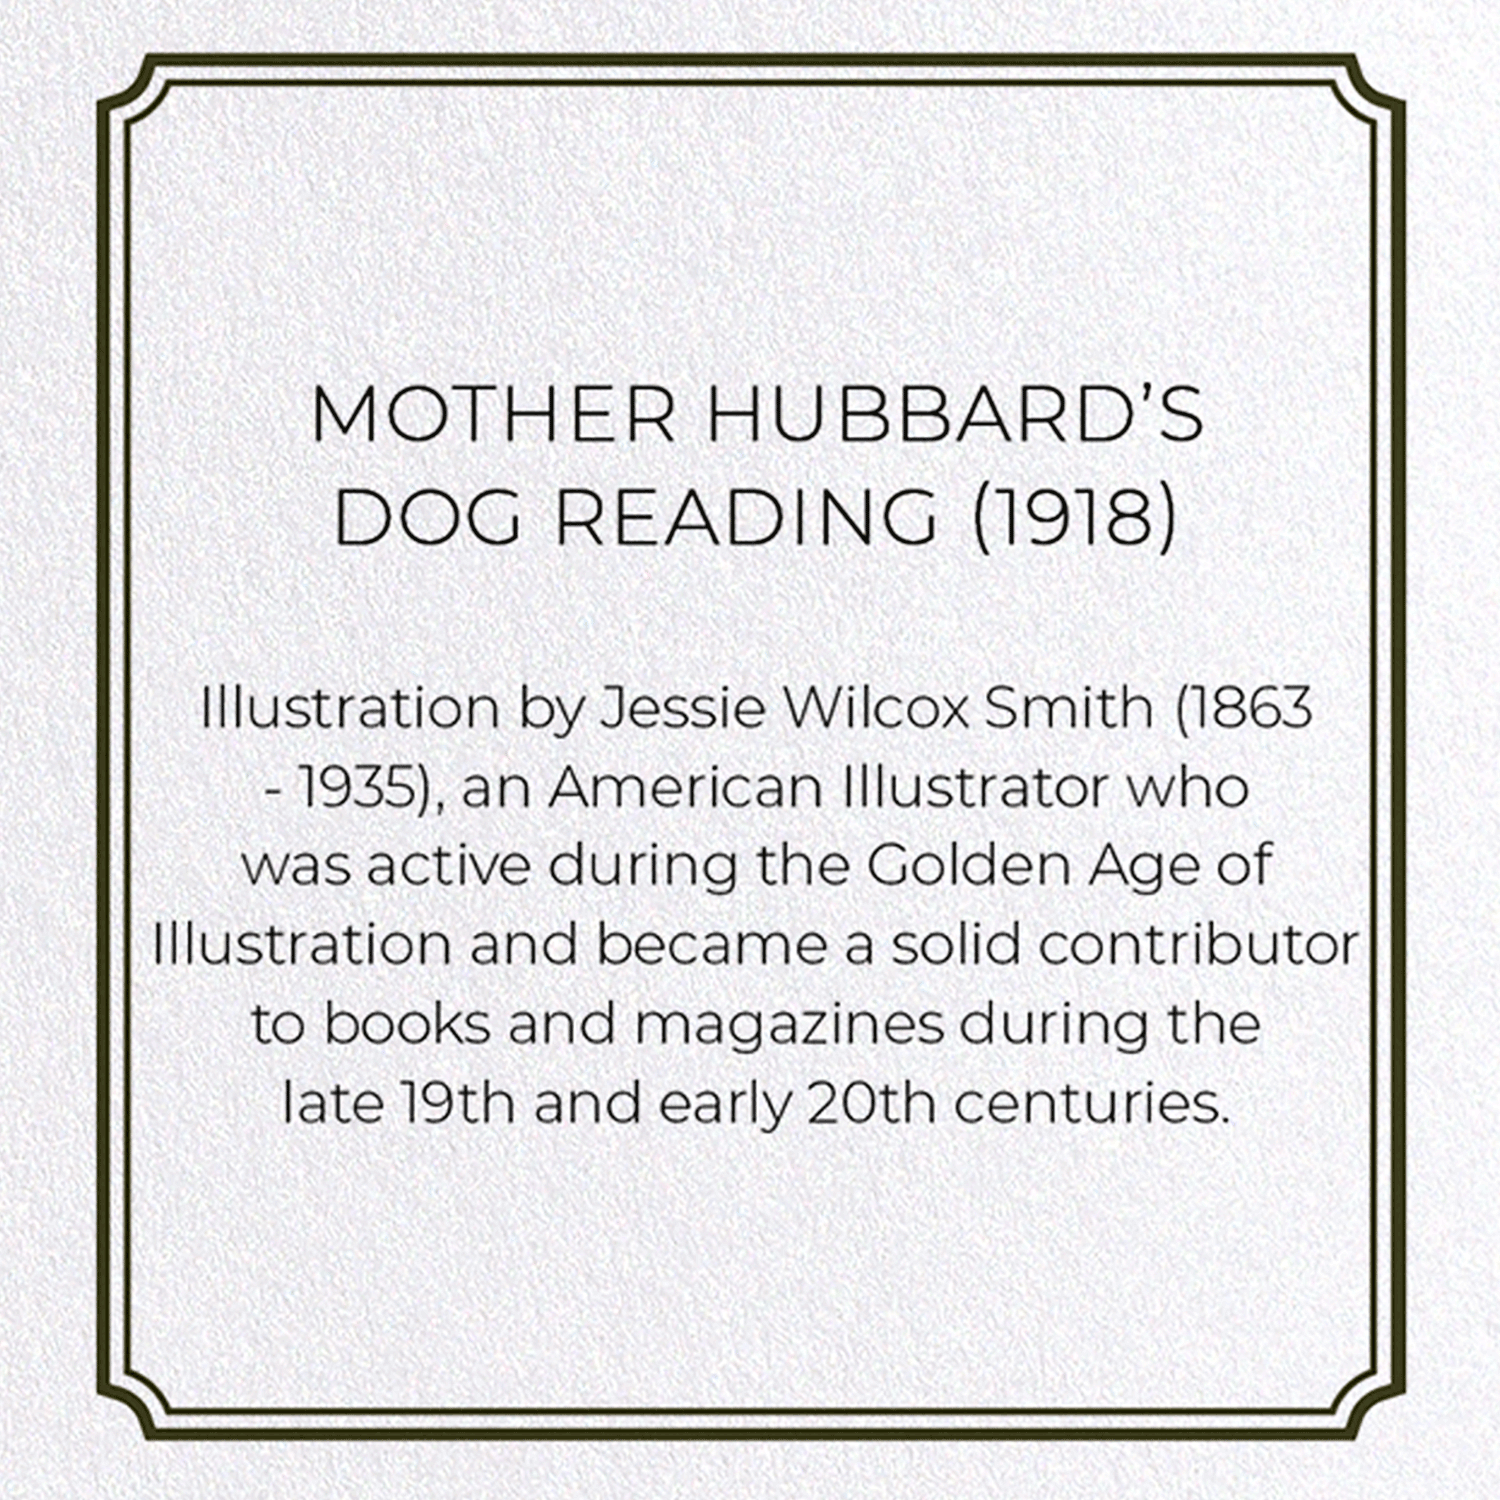 MOTHER HUBBARD’S DOG READING (1918): Victorian Greeting Card